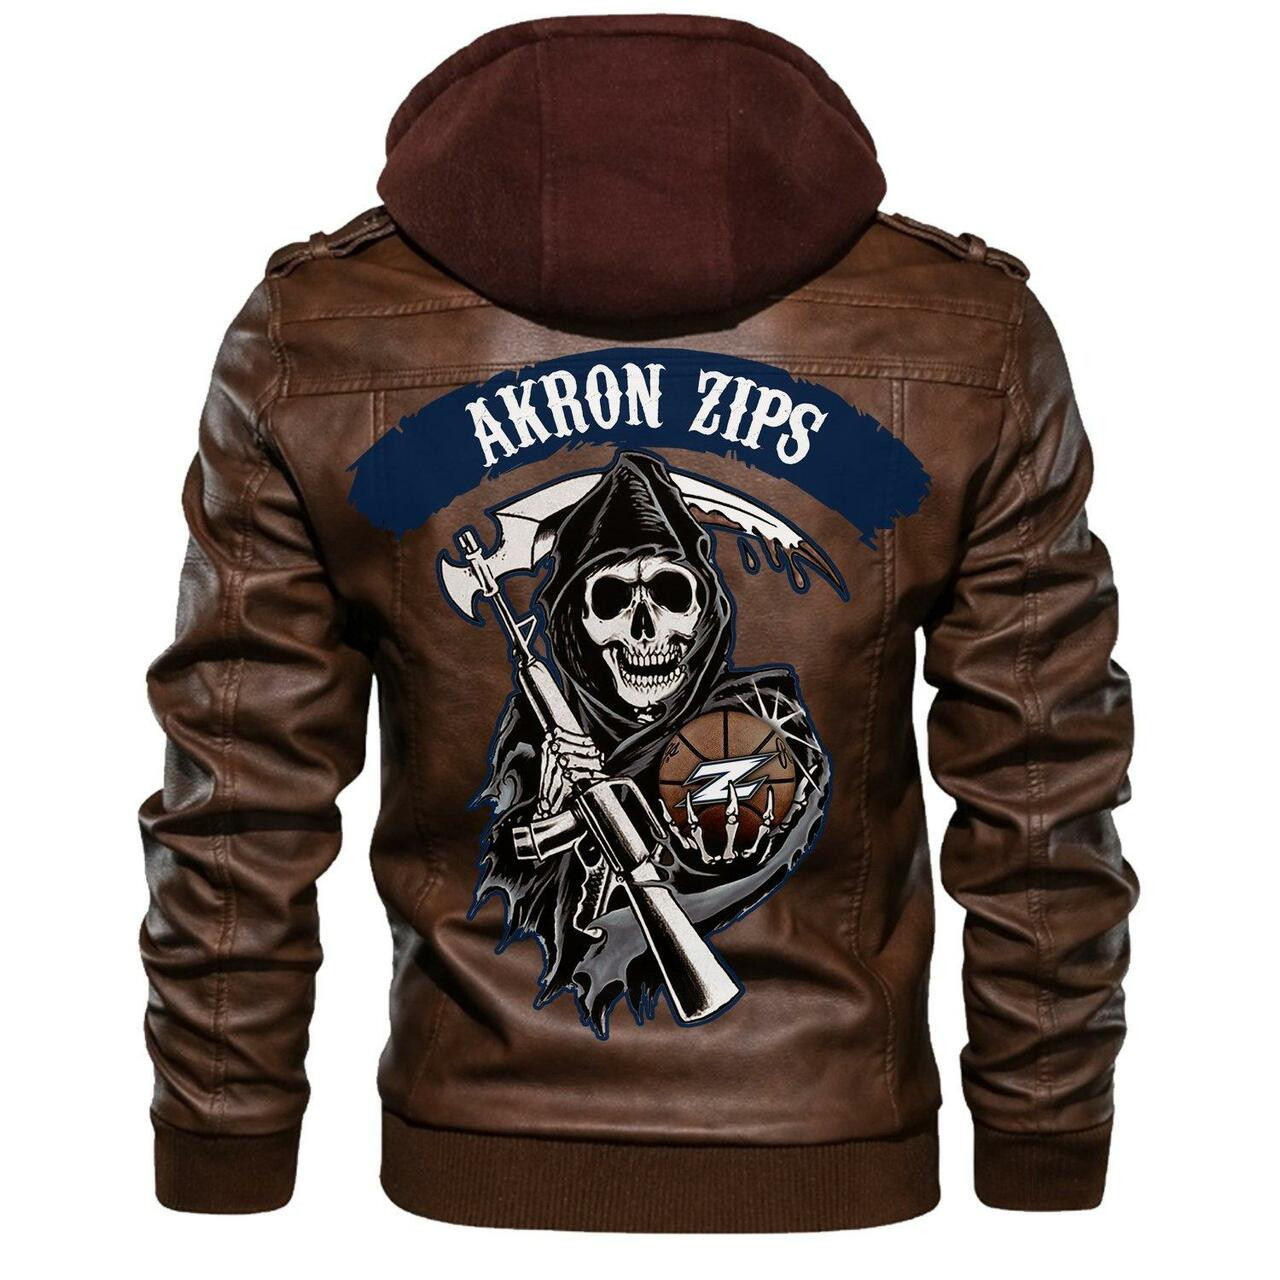 Check out and find the right leather jacket below 121